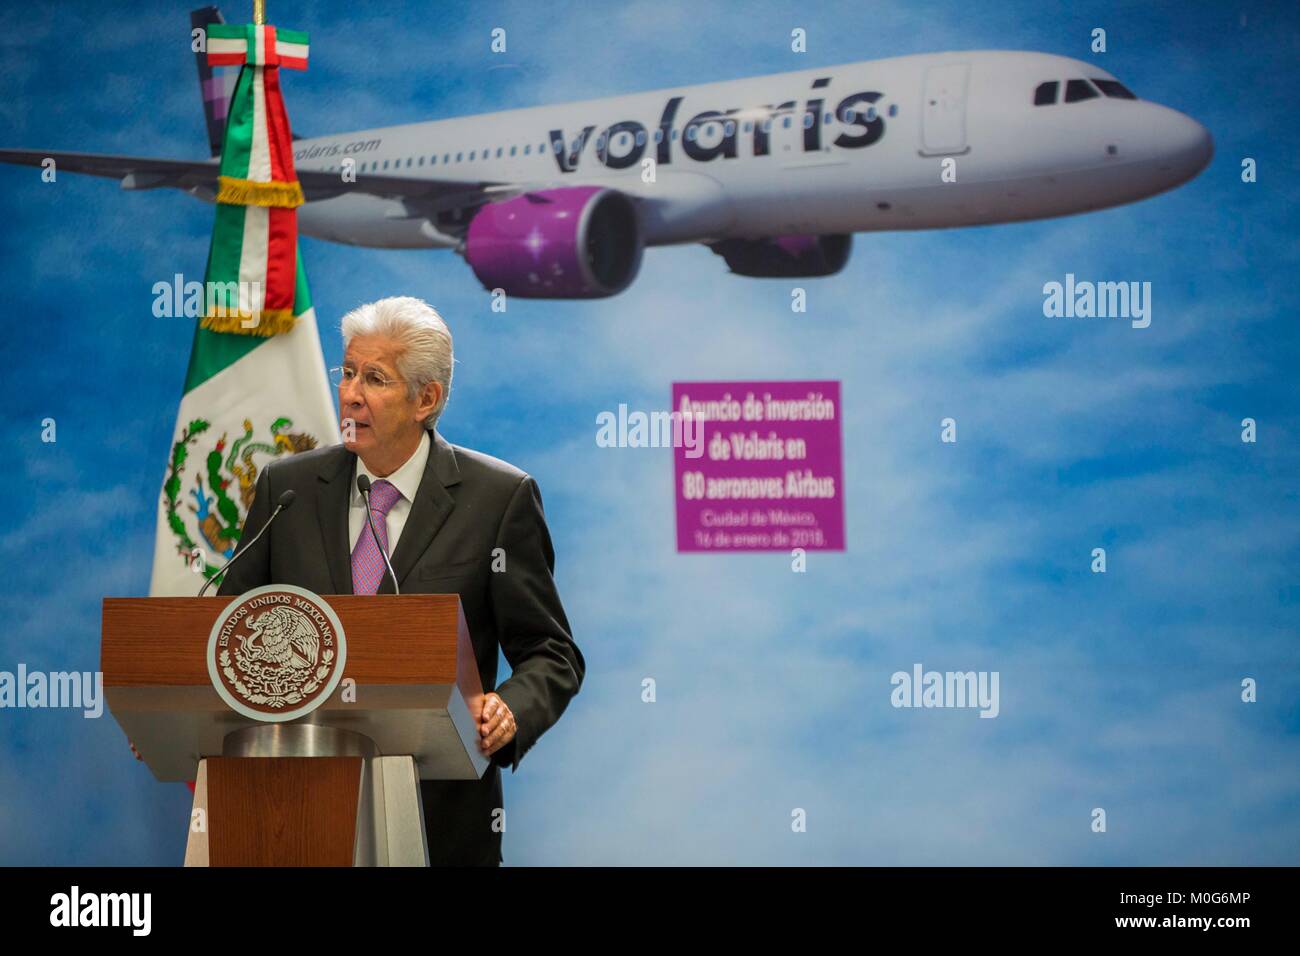 Mexican Secretary of Transportation Gerardo Ruiz comments on the purchase of 80 Airbus aircraft worth $9.3 billion dollars by the Mexican airline Volaris during an event at the National Palace January 17, 2018 in Mexico City, Mexico. Stock Photo